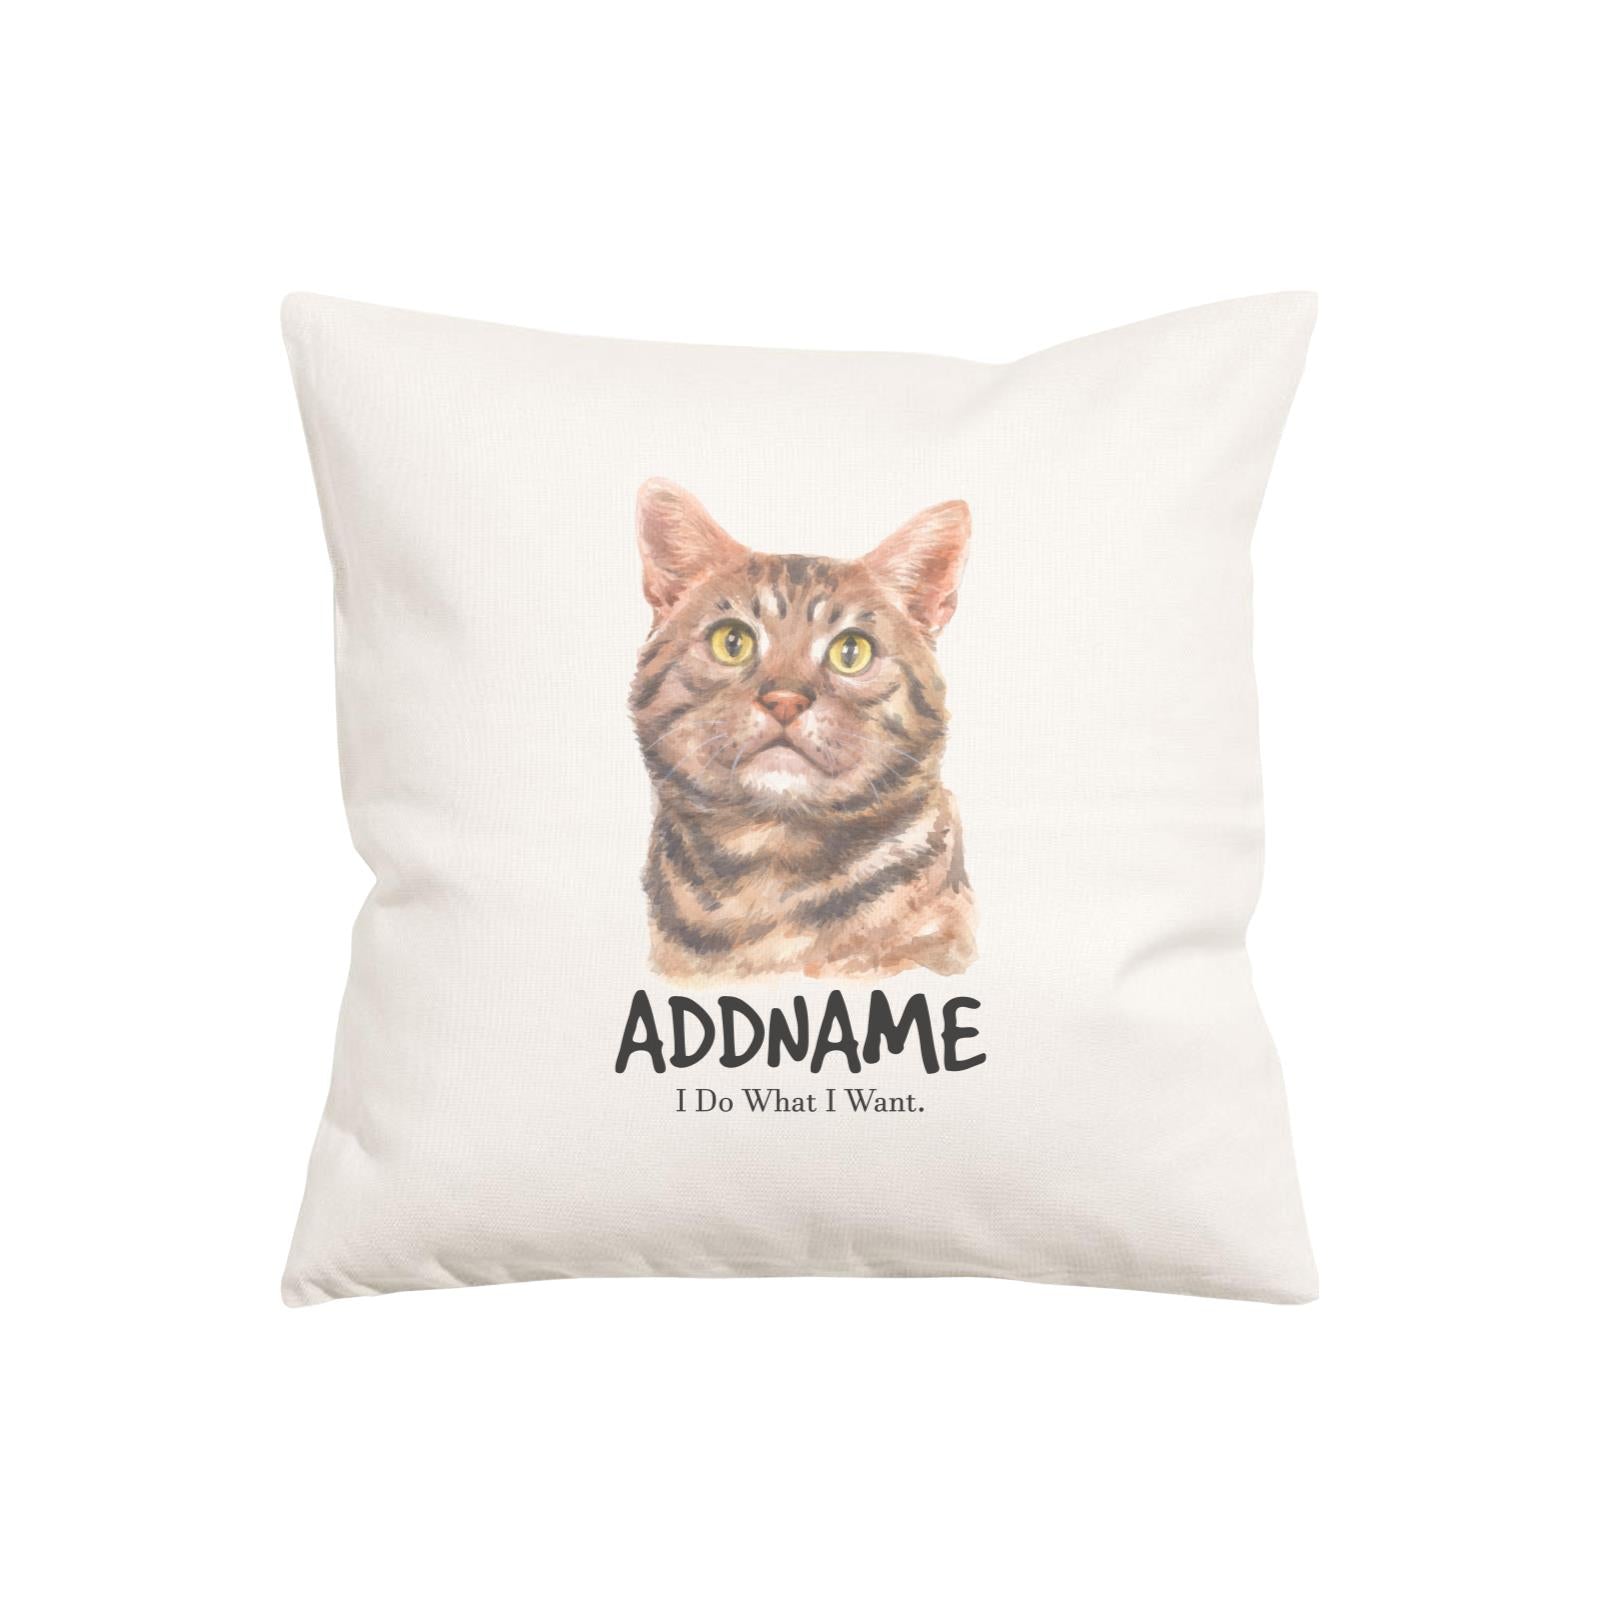 Watercolor Cat Series Brown American Shorthair I Do What I Want Addname Pillow Cushion